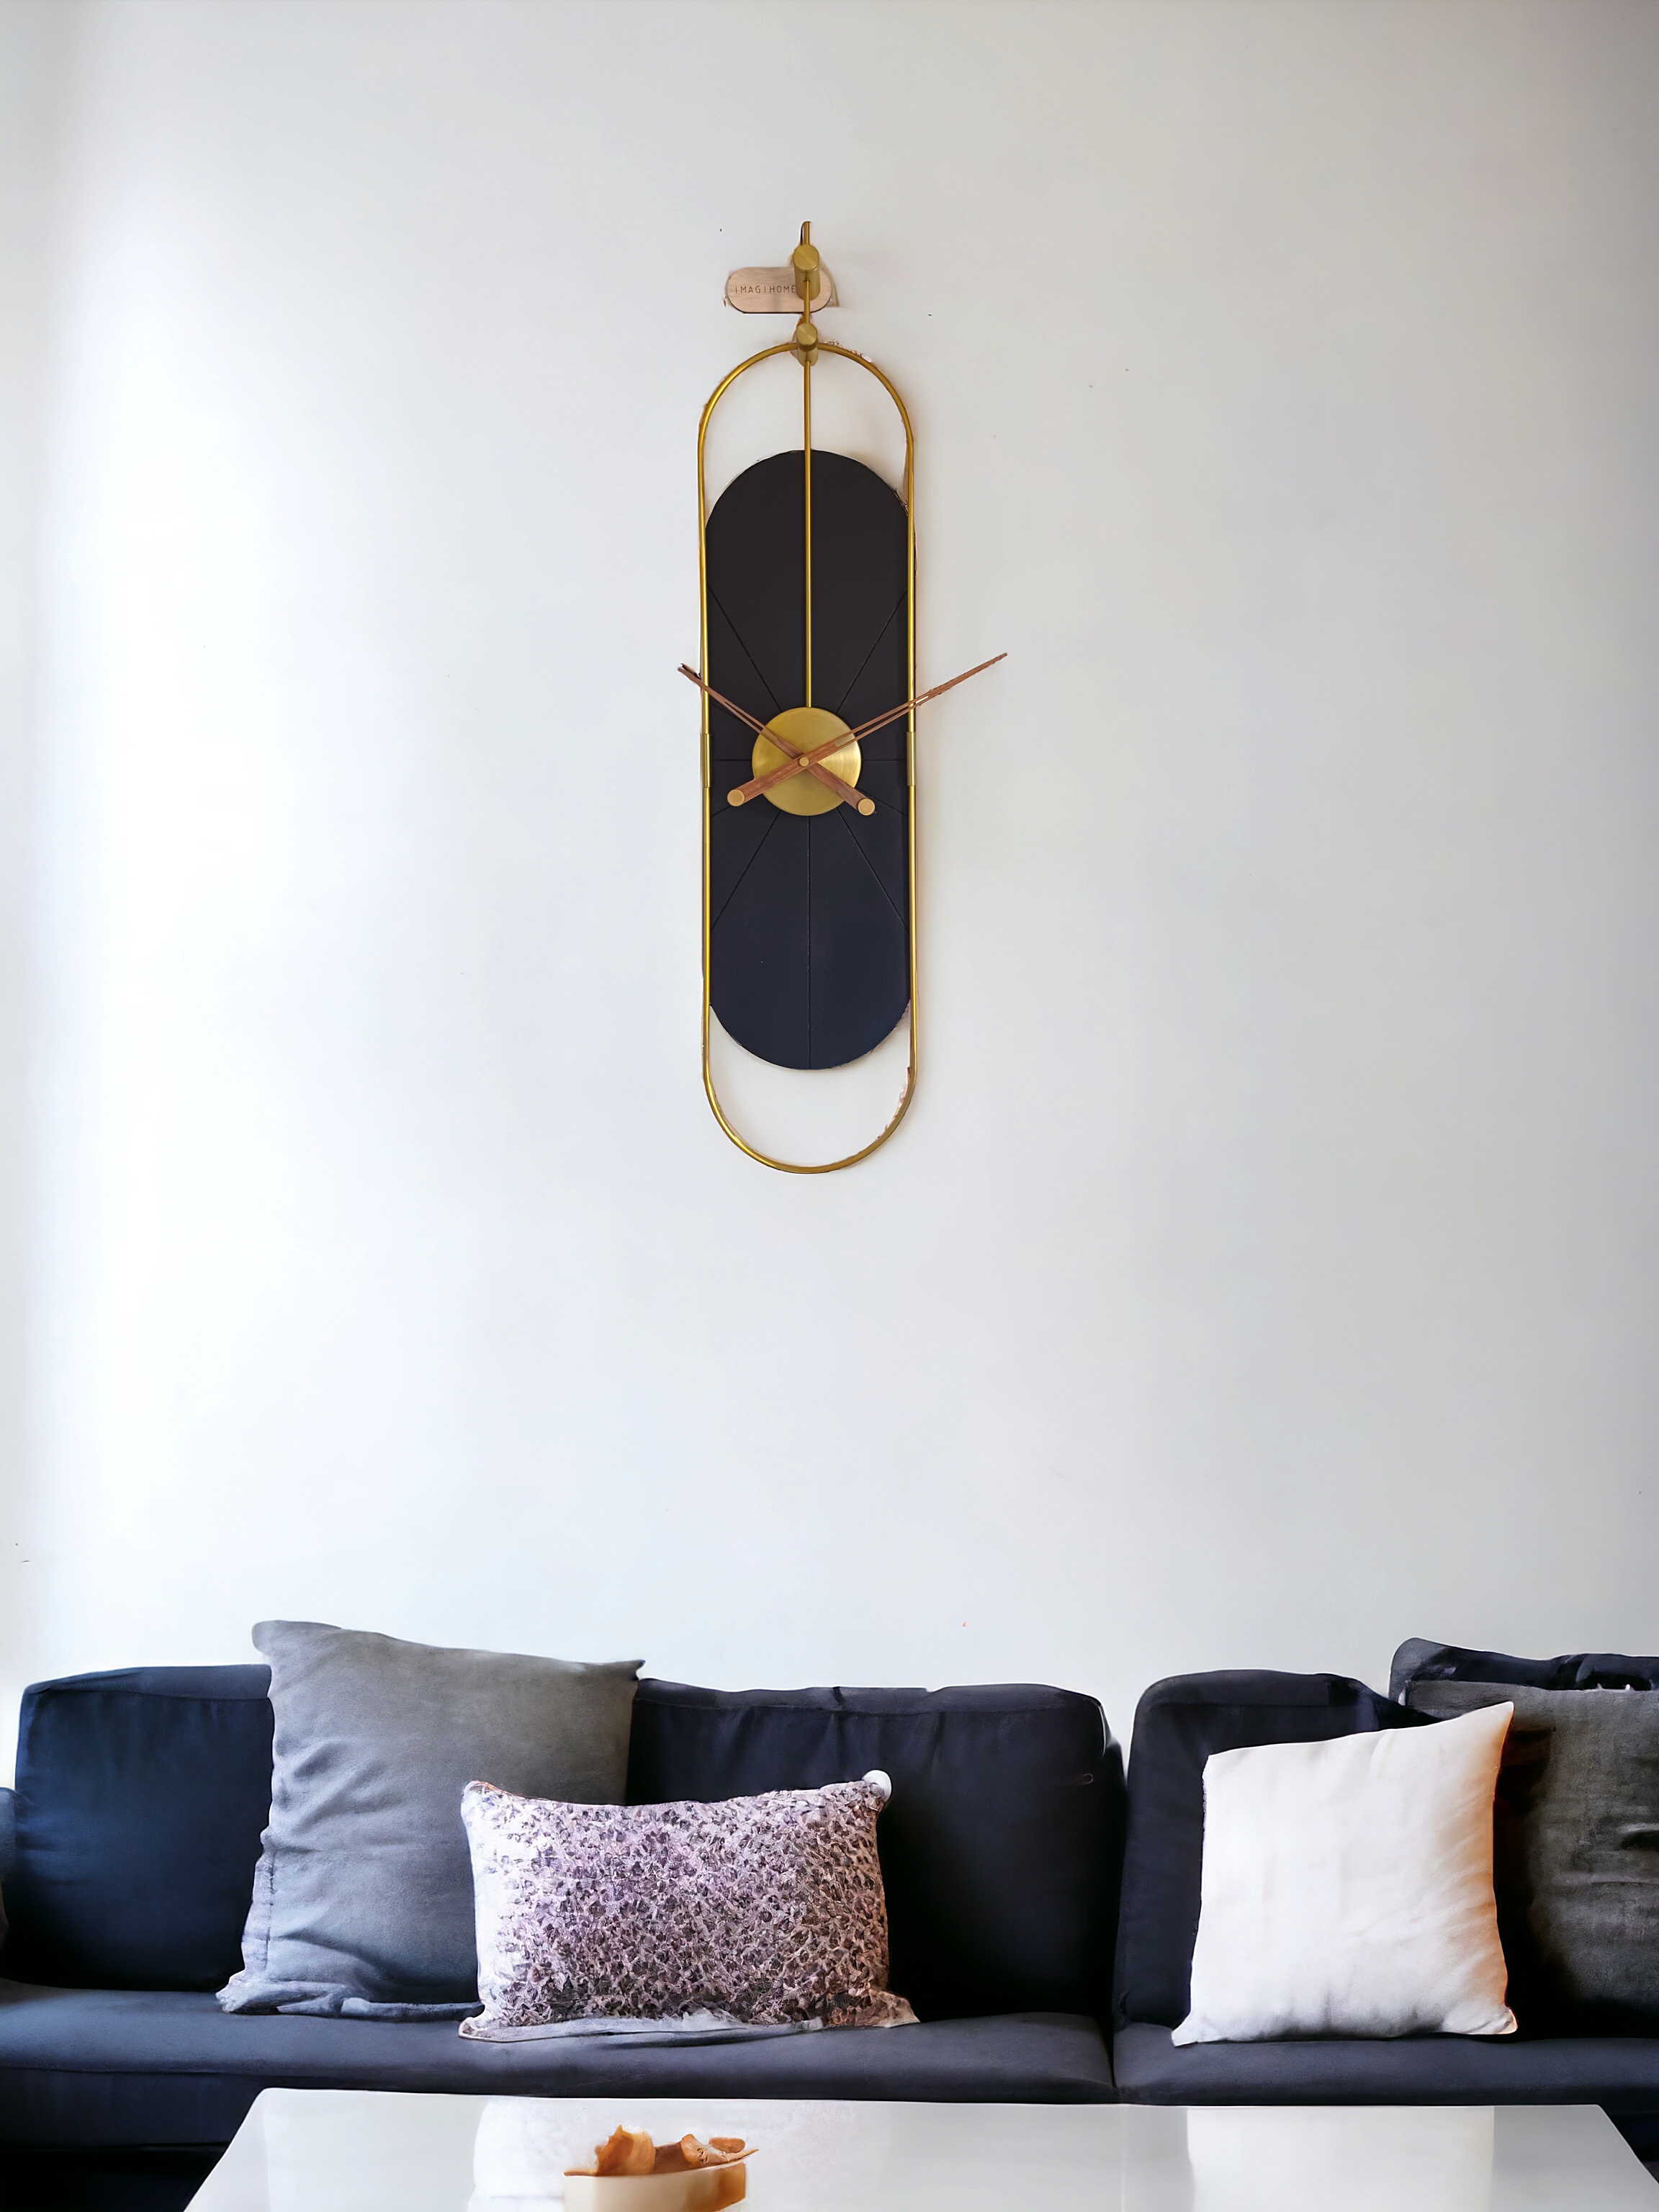 Black Capsule Wall Clock with Golden Metal Frame